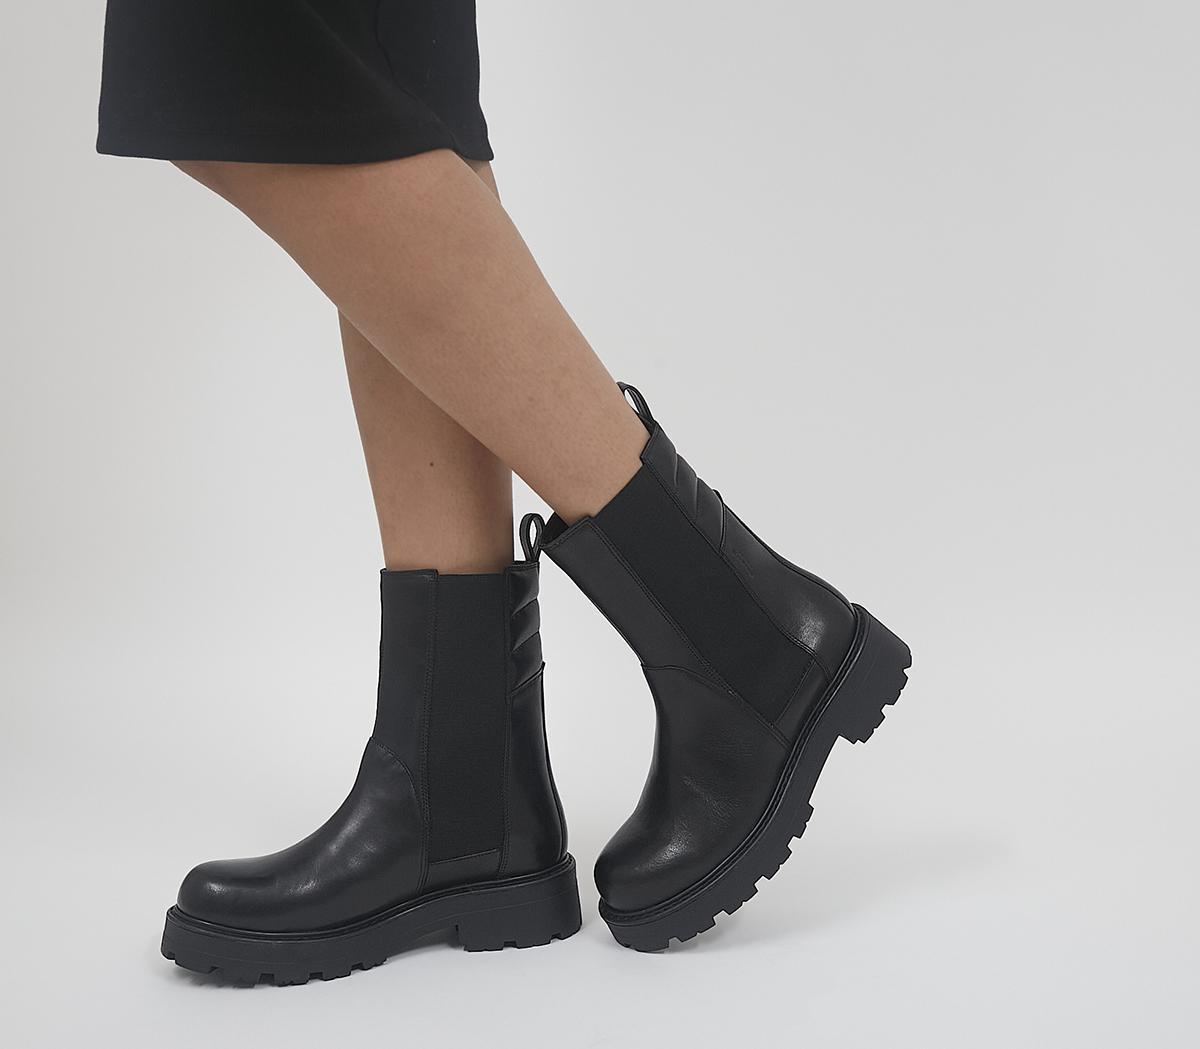 Vagabond Cosmo 2.0 High Chelsea Black - Ankle Boots